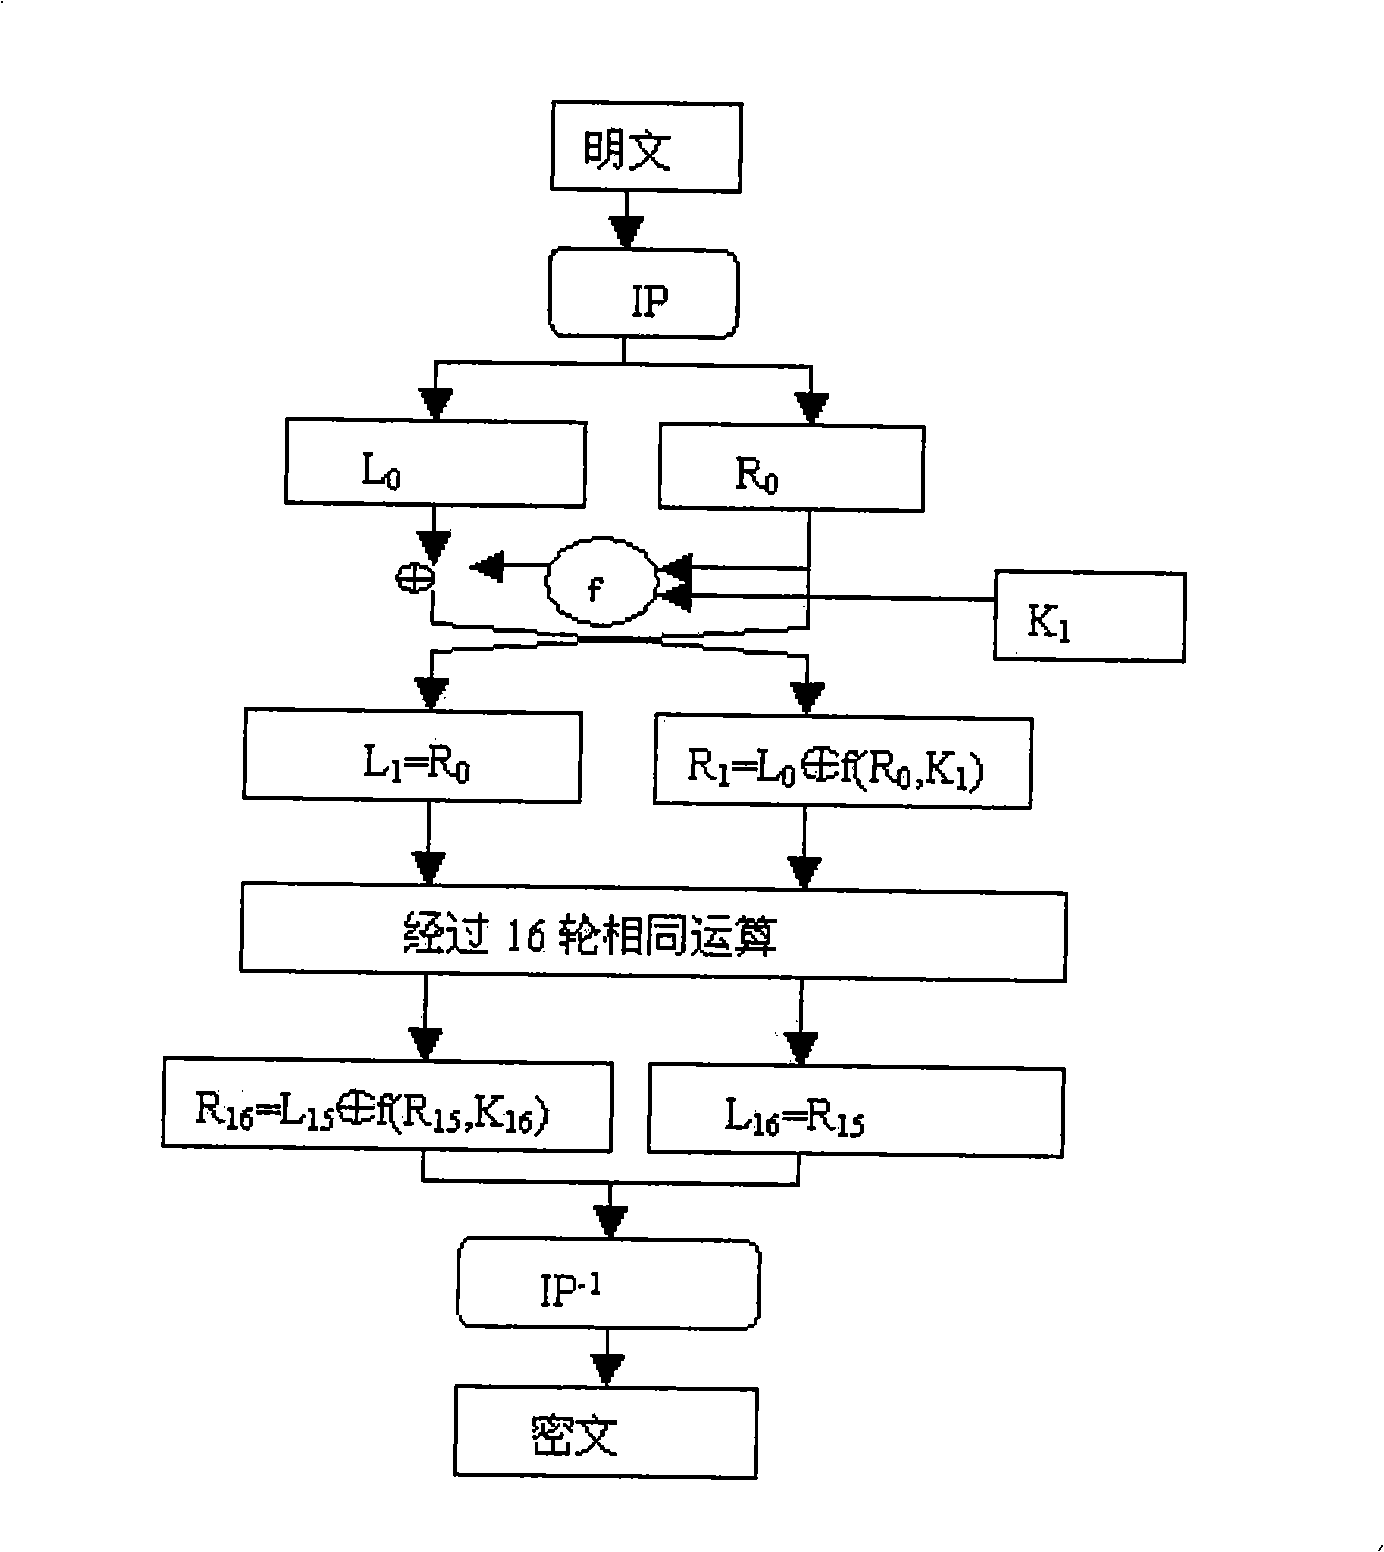 A mixed encryption method in session system